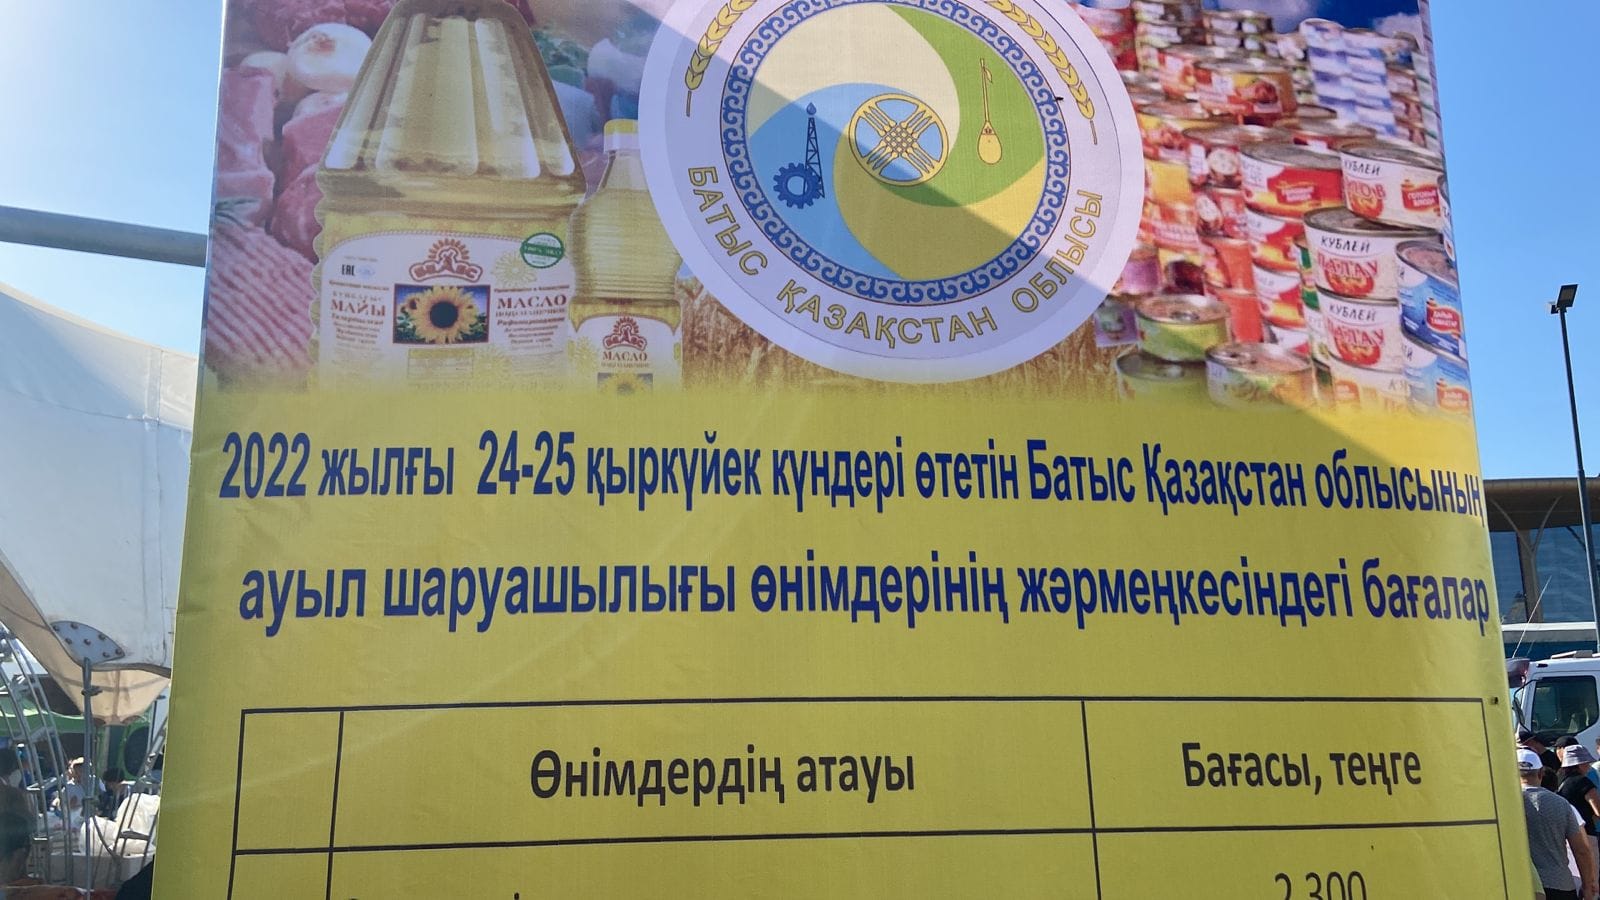 From September 24 to 25, the fair of agricultural producers of the West Kazakhstan region is held in the capital of our country.